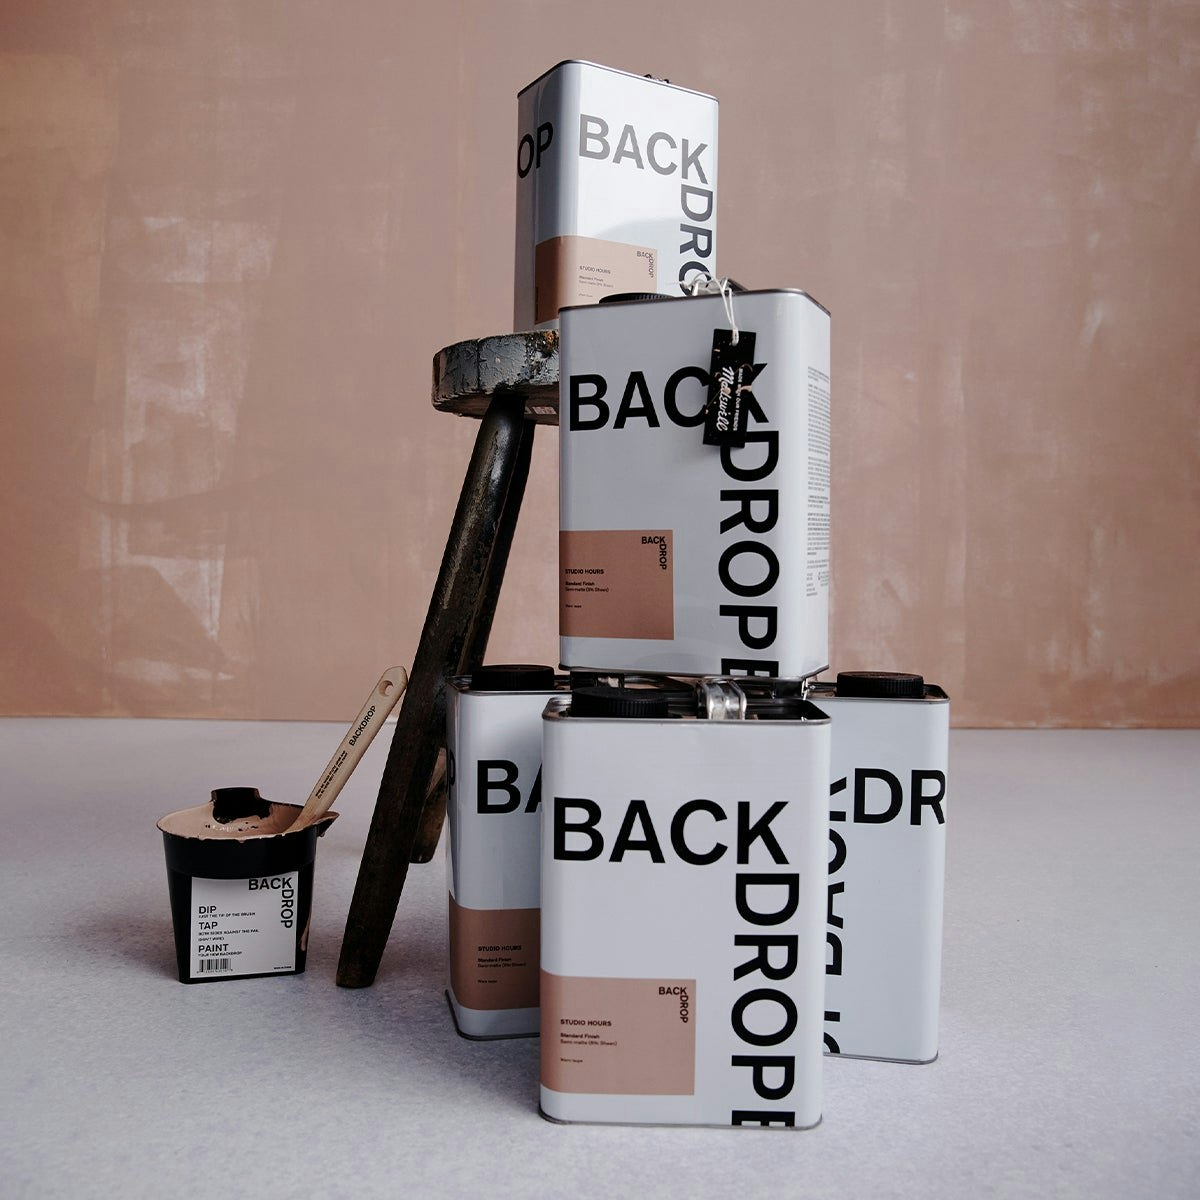 A stack of STUDIO HOURS paint cans from the Backdrop x Madewell collection